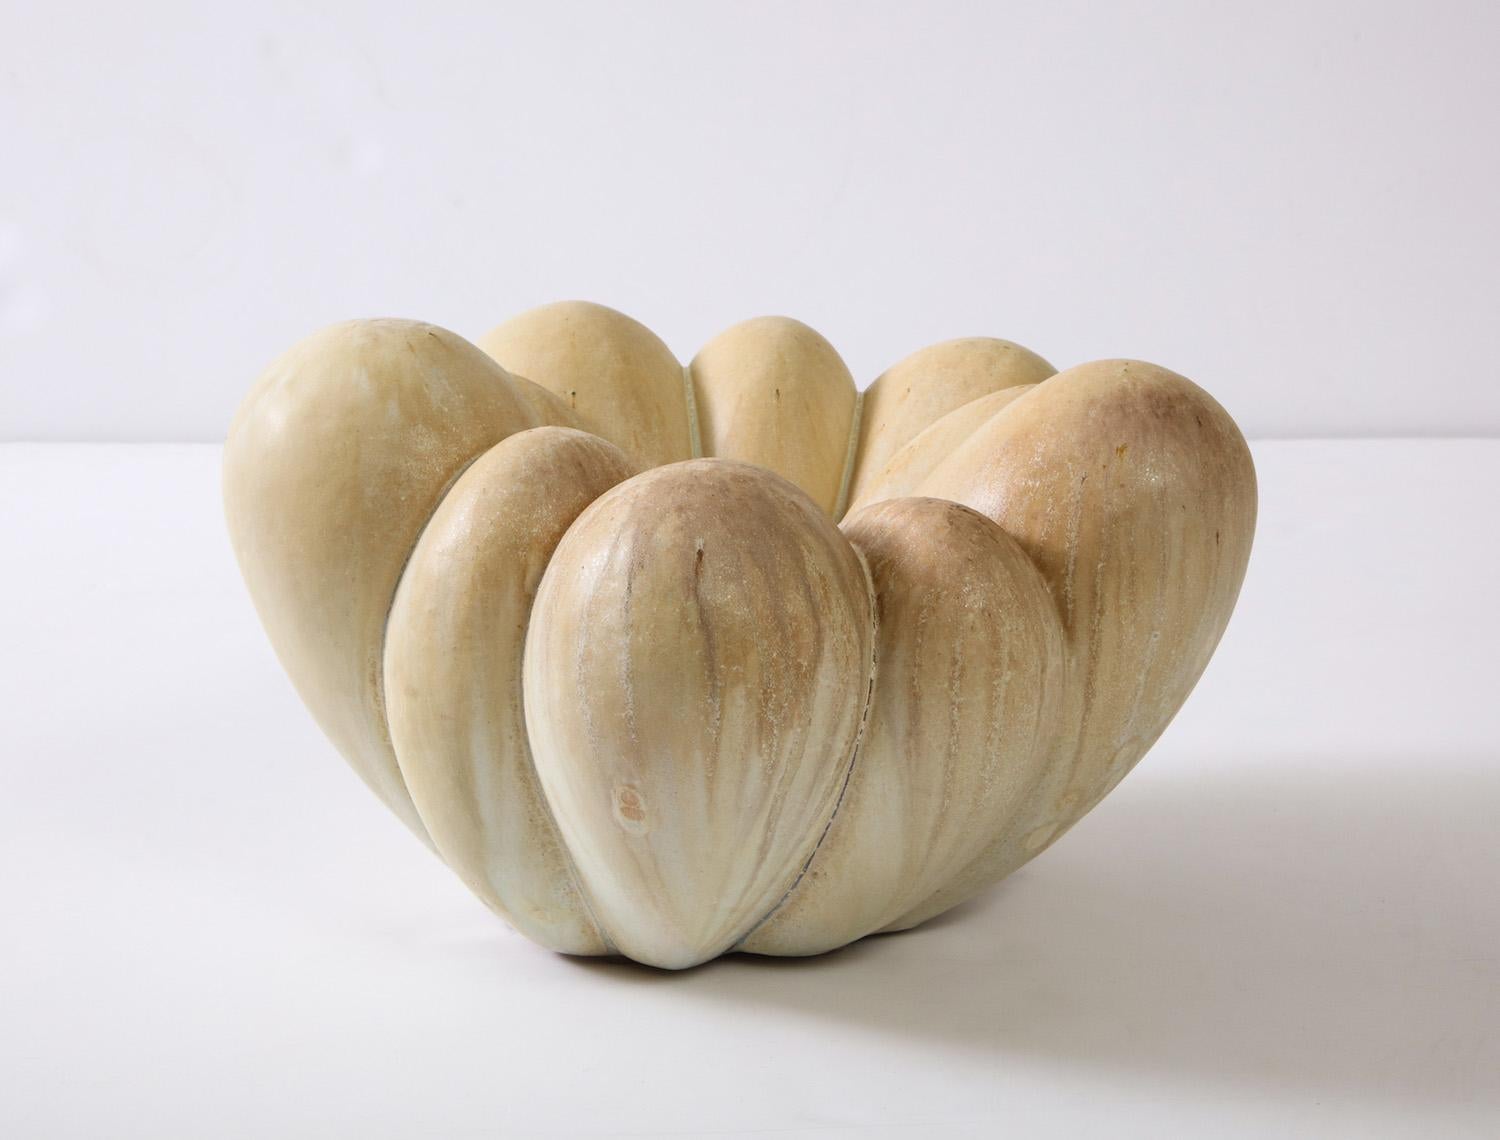 Untitled bowl #6 by Rosanne Sniderman. Stoneware bowl form. Wood fired with cream glazes.
  